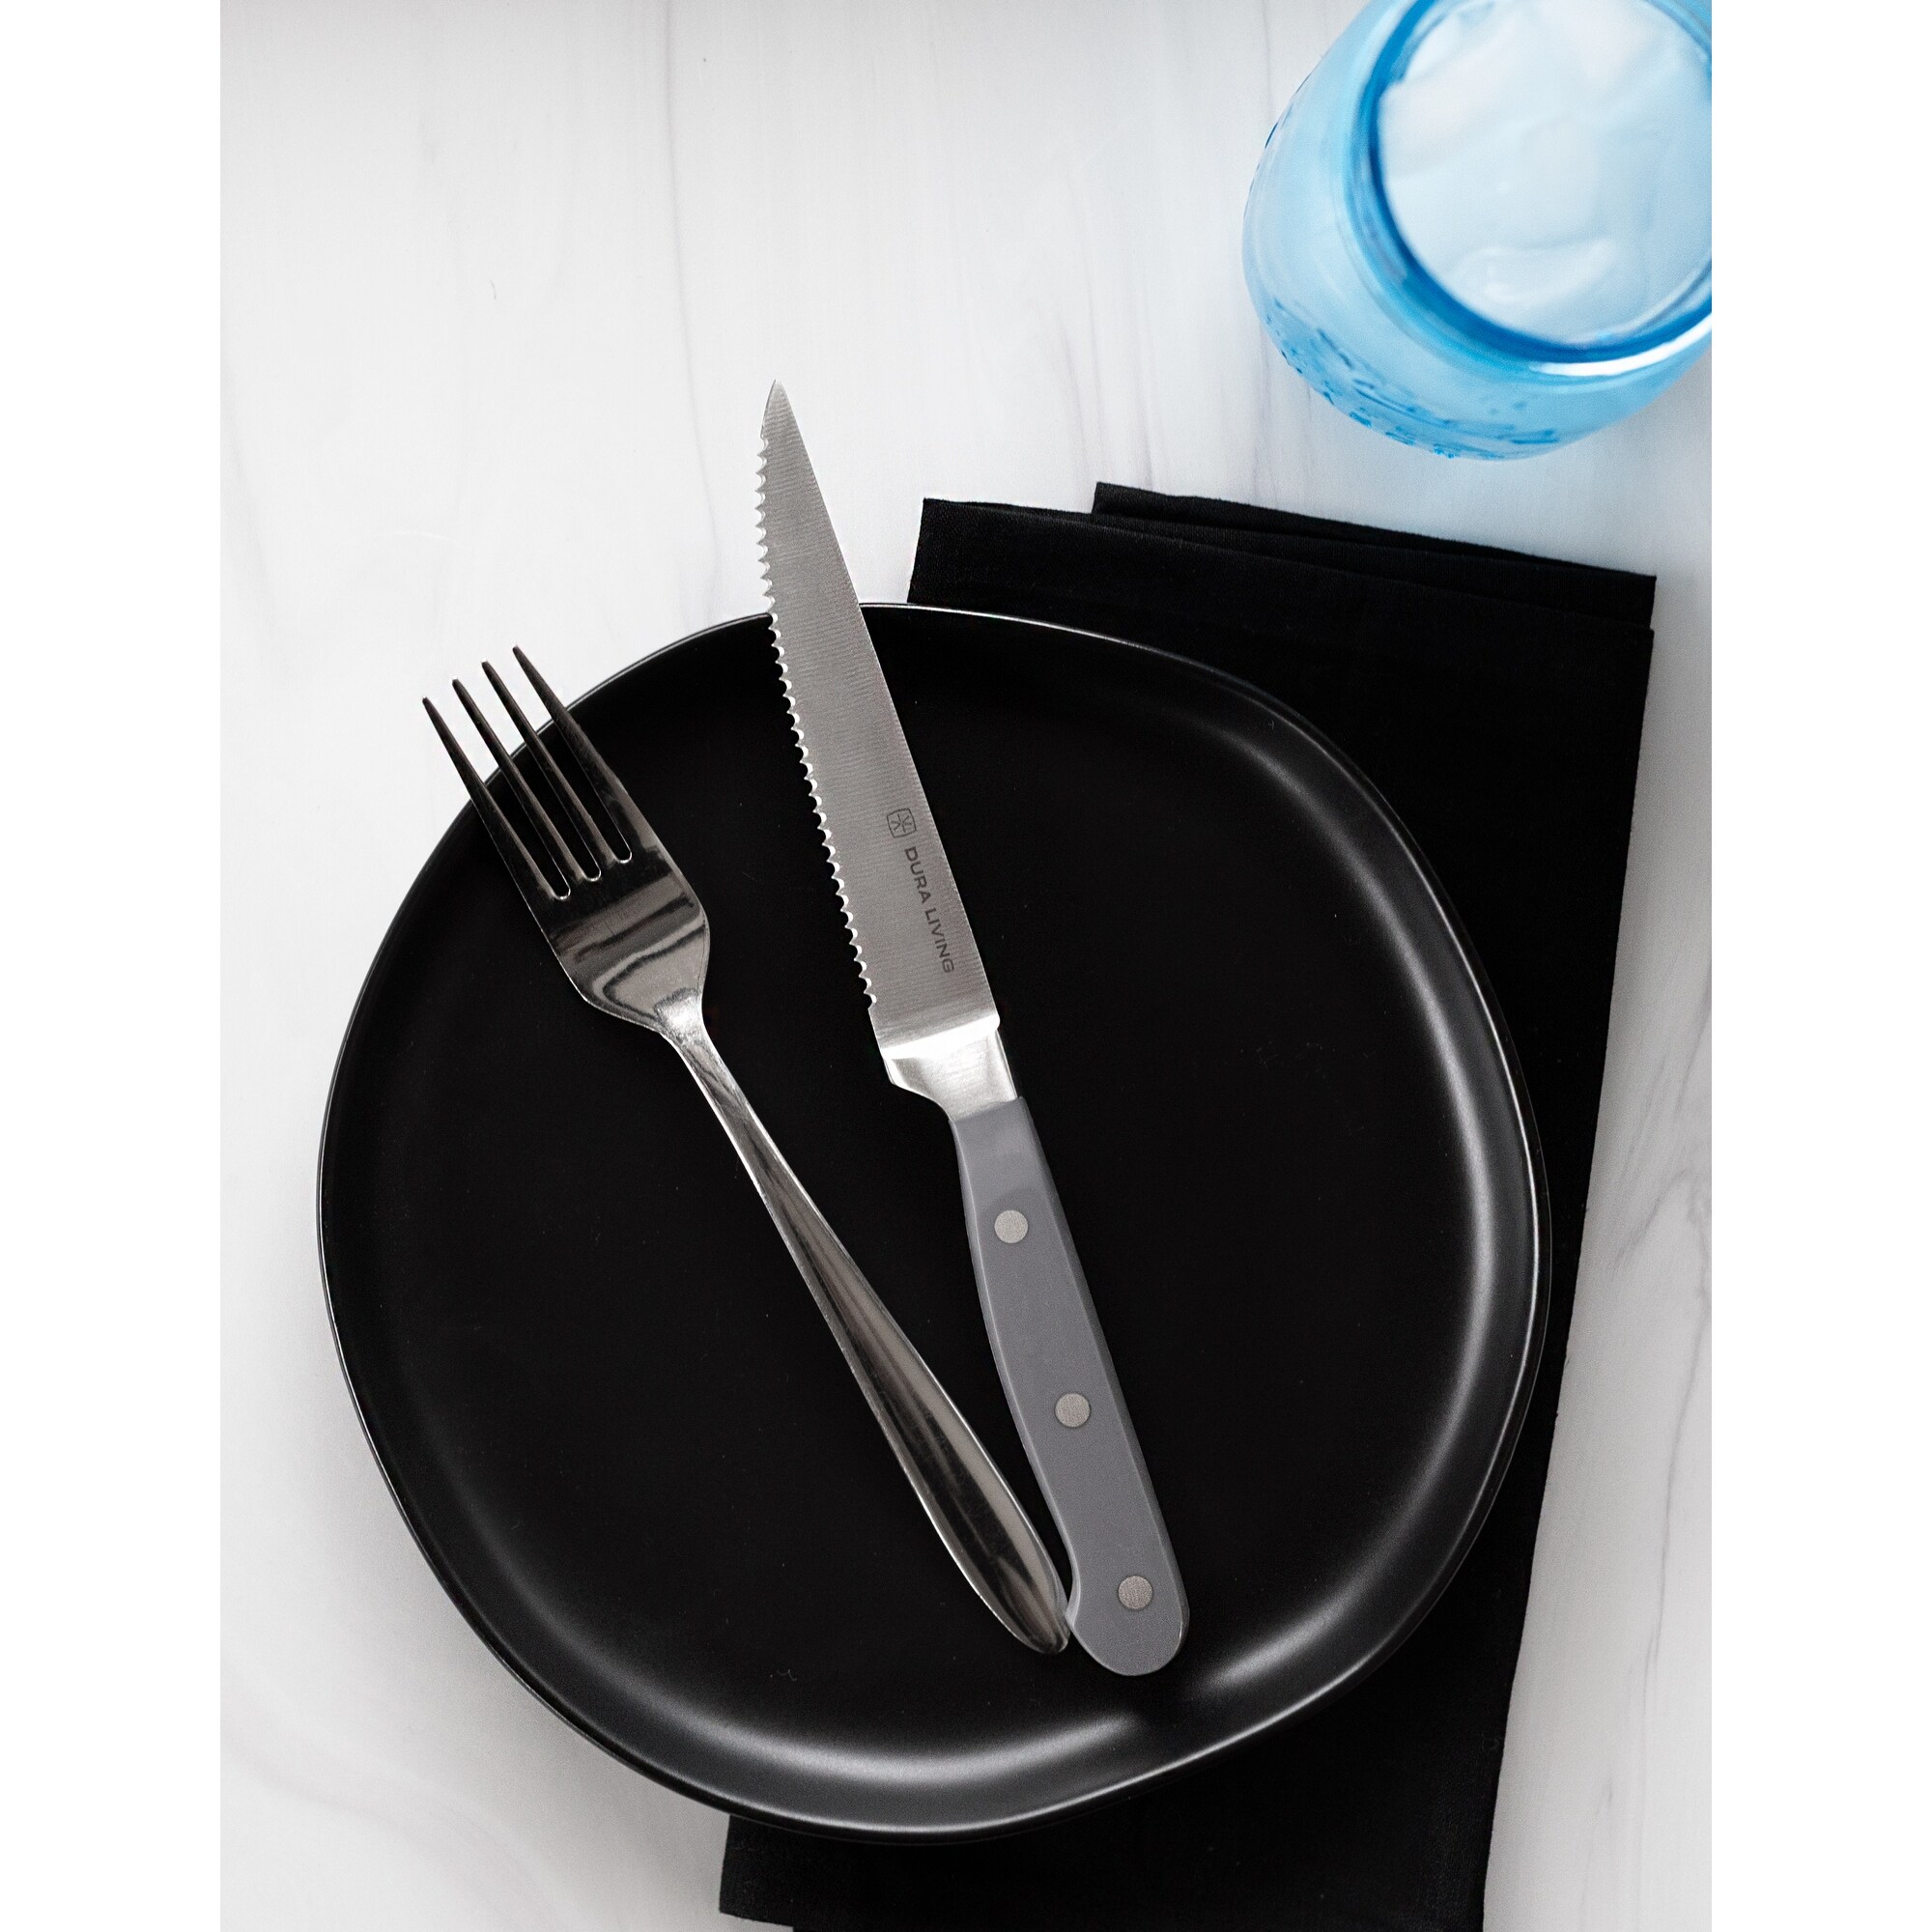 https://ak1.ostkcdn.com/images/products/is/images/direct/d421904d74a8b55d1aedb9fba6f921914a2eb025/Dura-Living-Steak-Knives-Set-of-8---Superior-Forged-High-Carbon-Stainless-Steel-Serrated-4.5-inch-Steak-Knife-set%2C-Gray.jpg